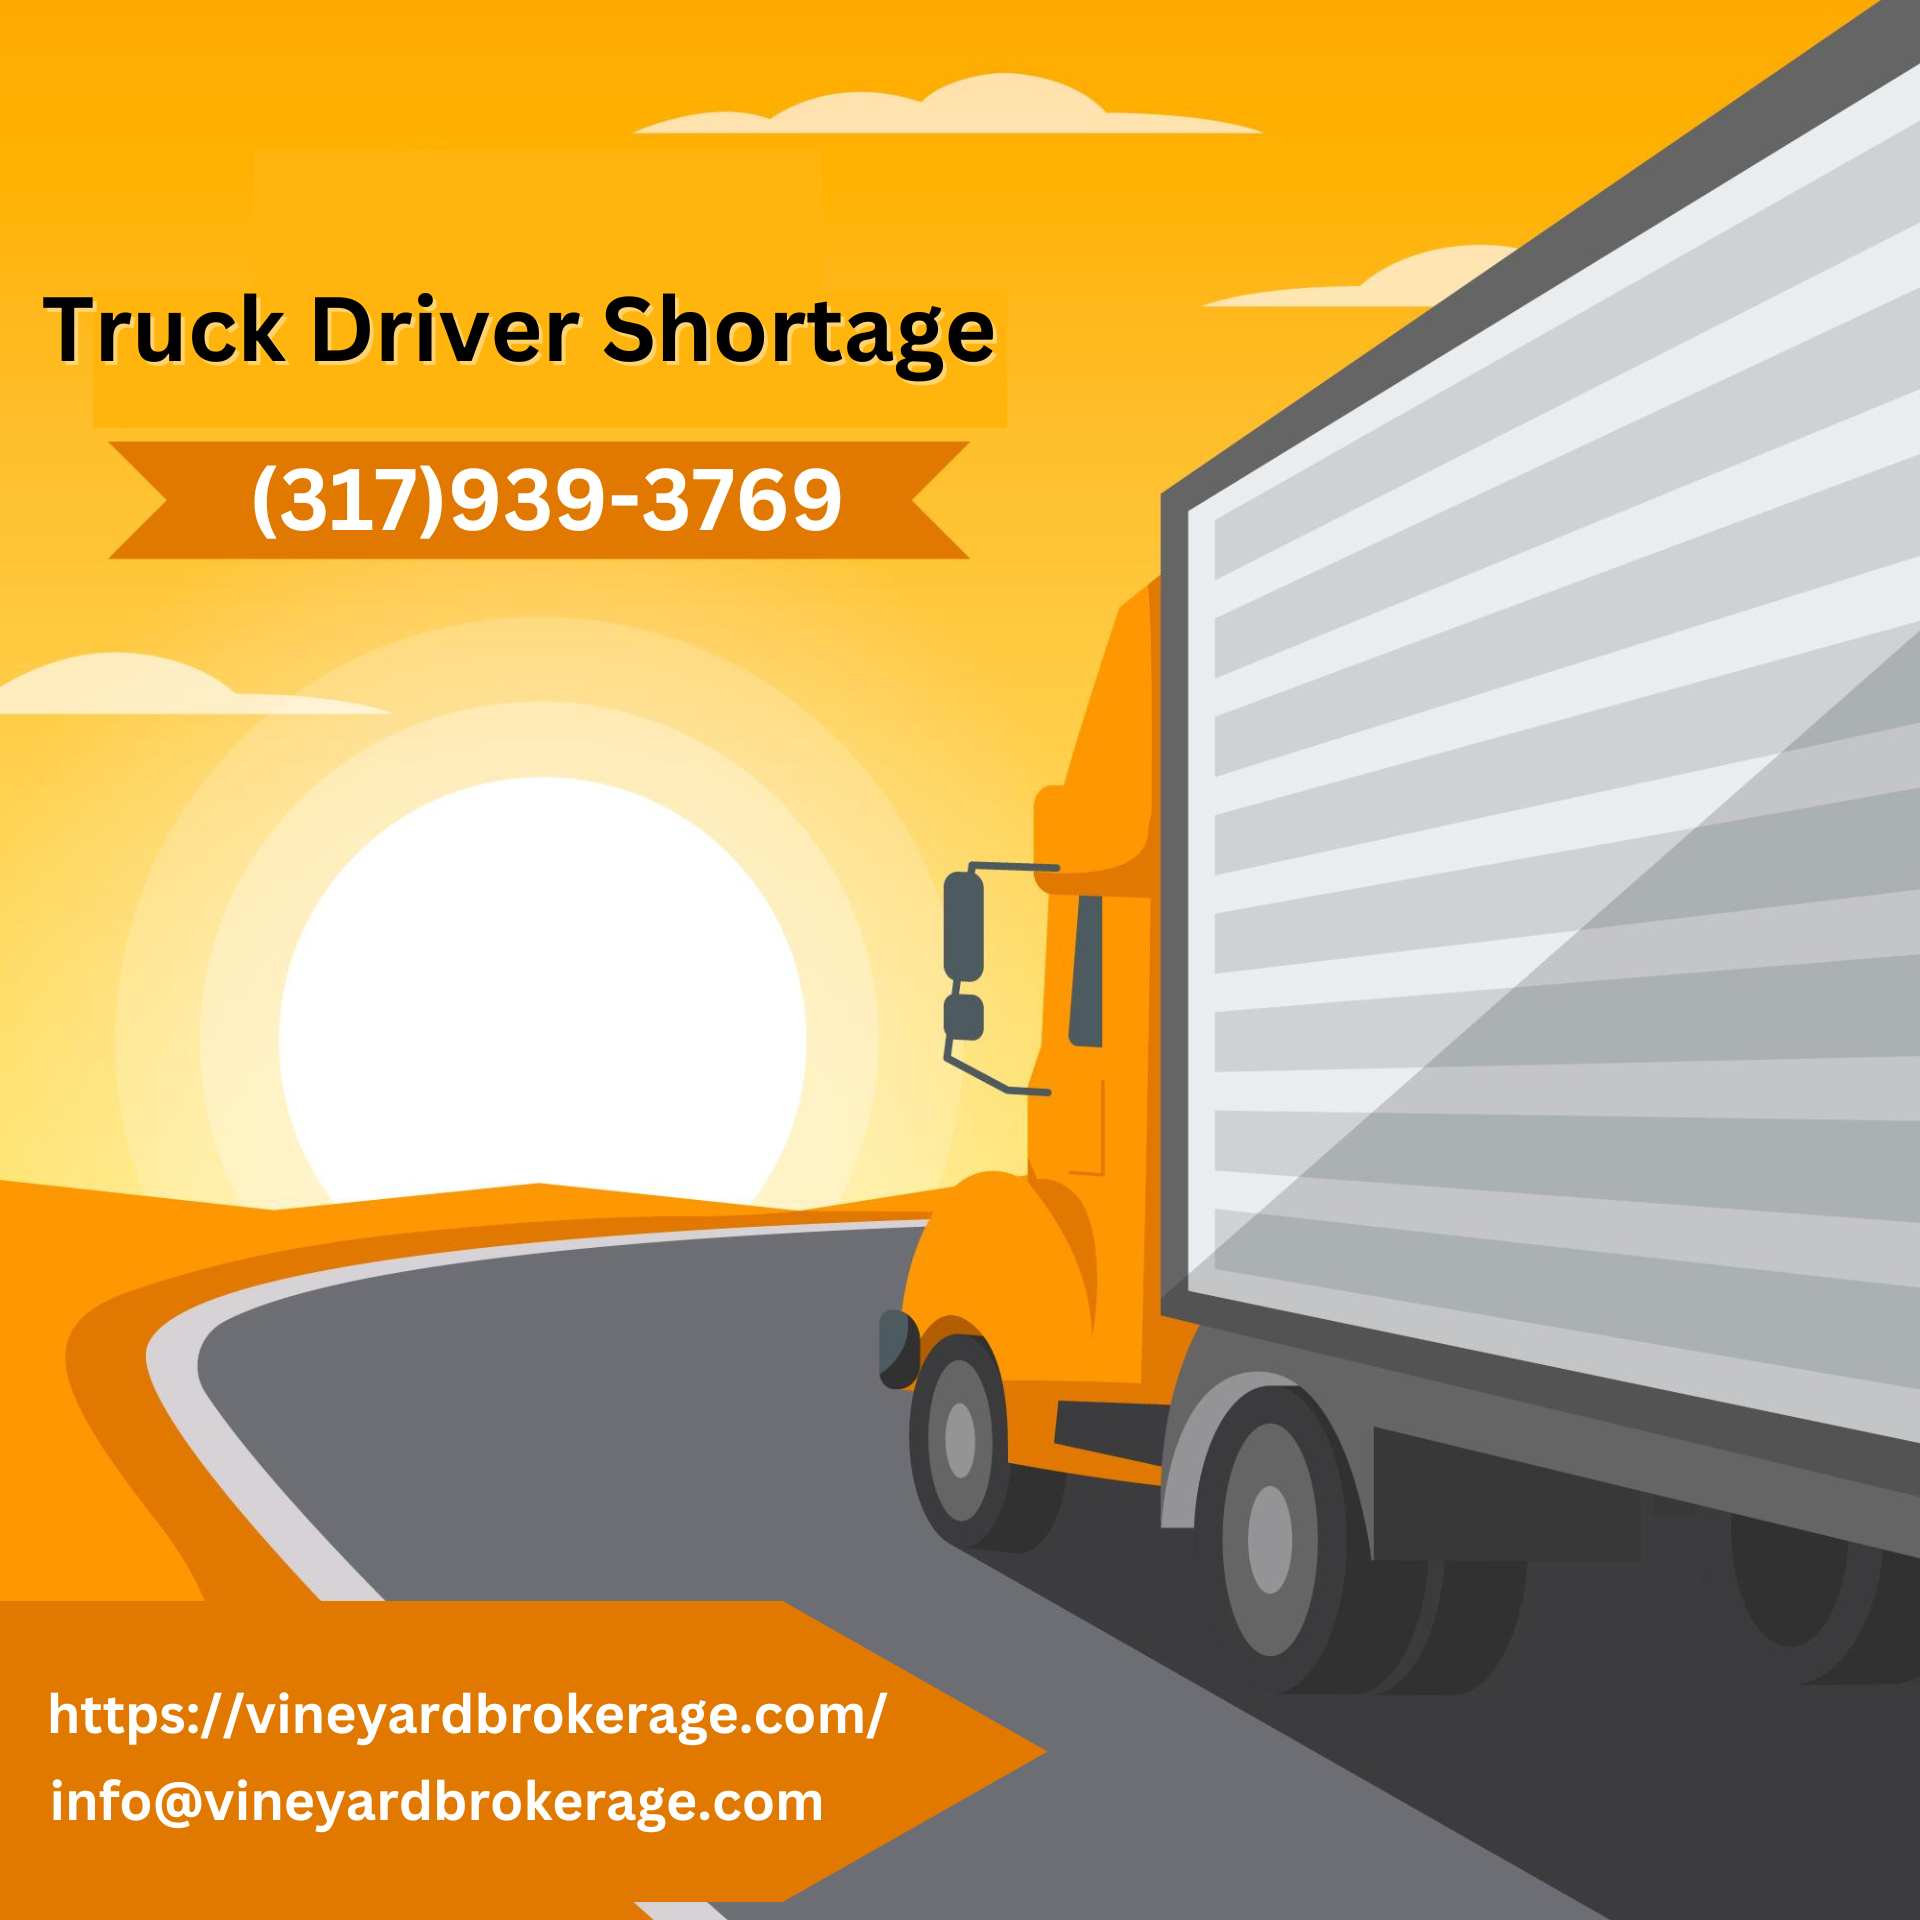 Nation-wide Truck Driver Shortage: Causes and Solutions